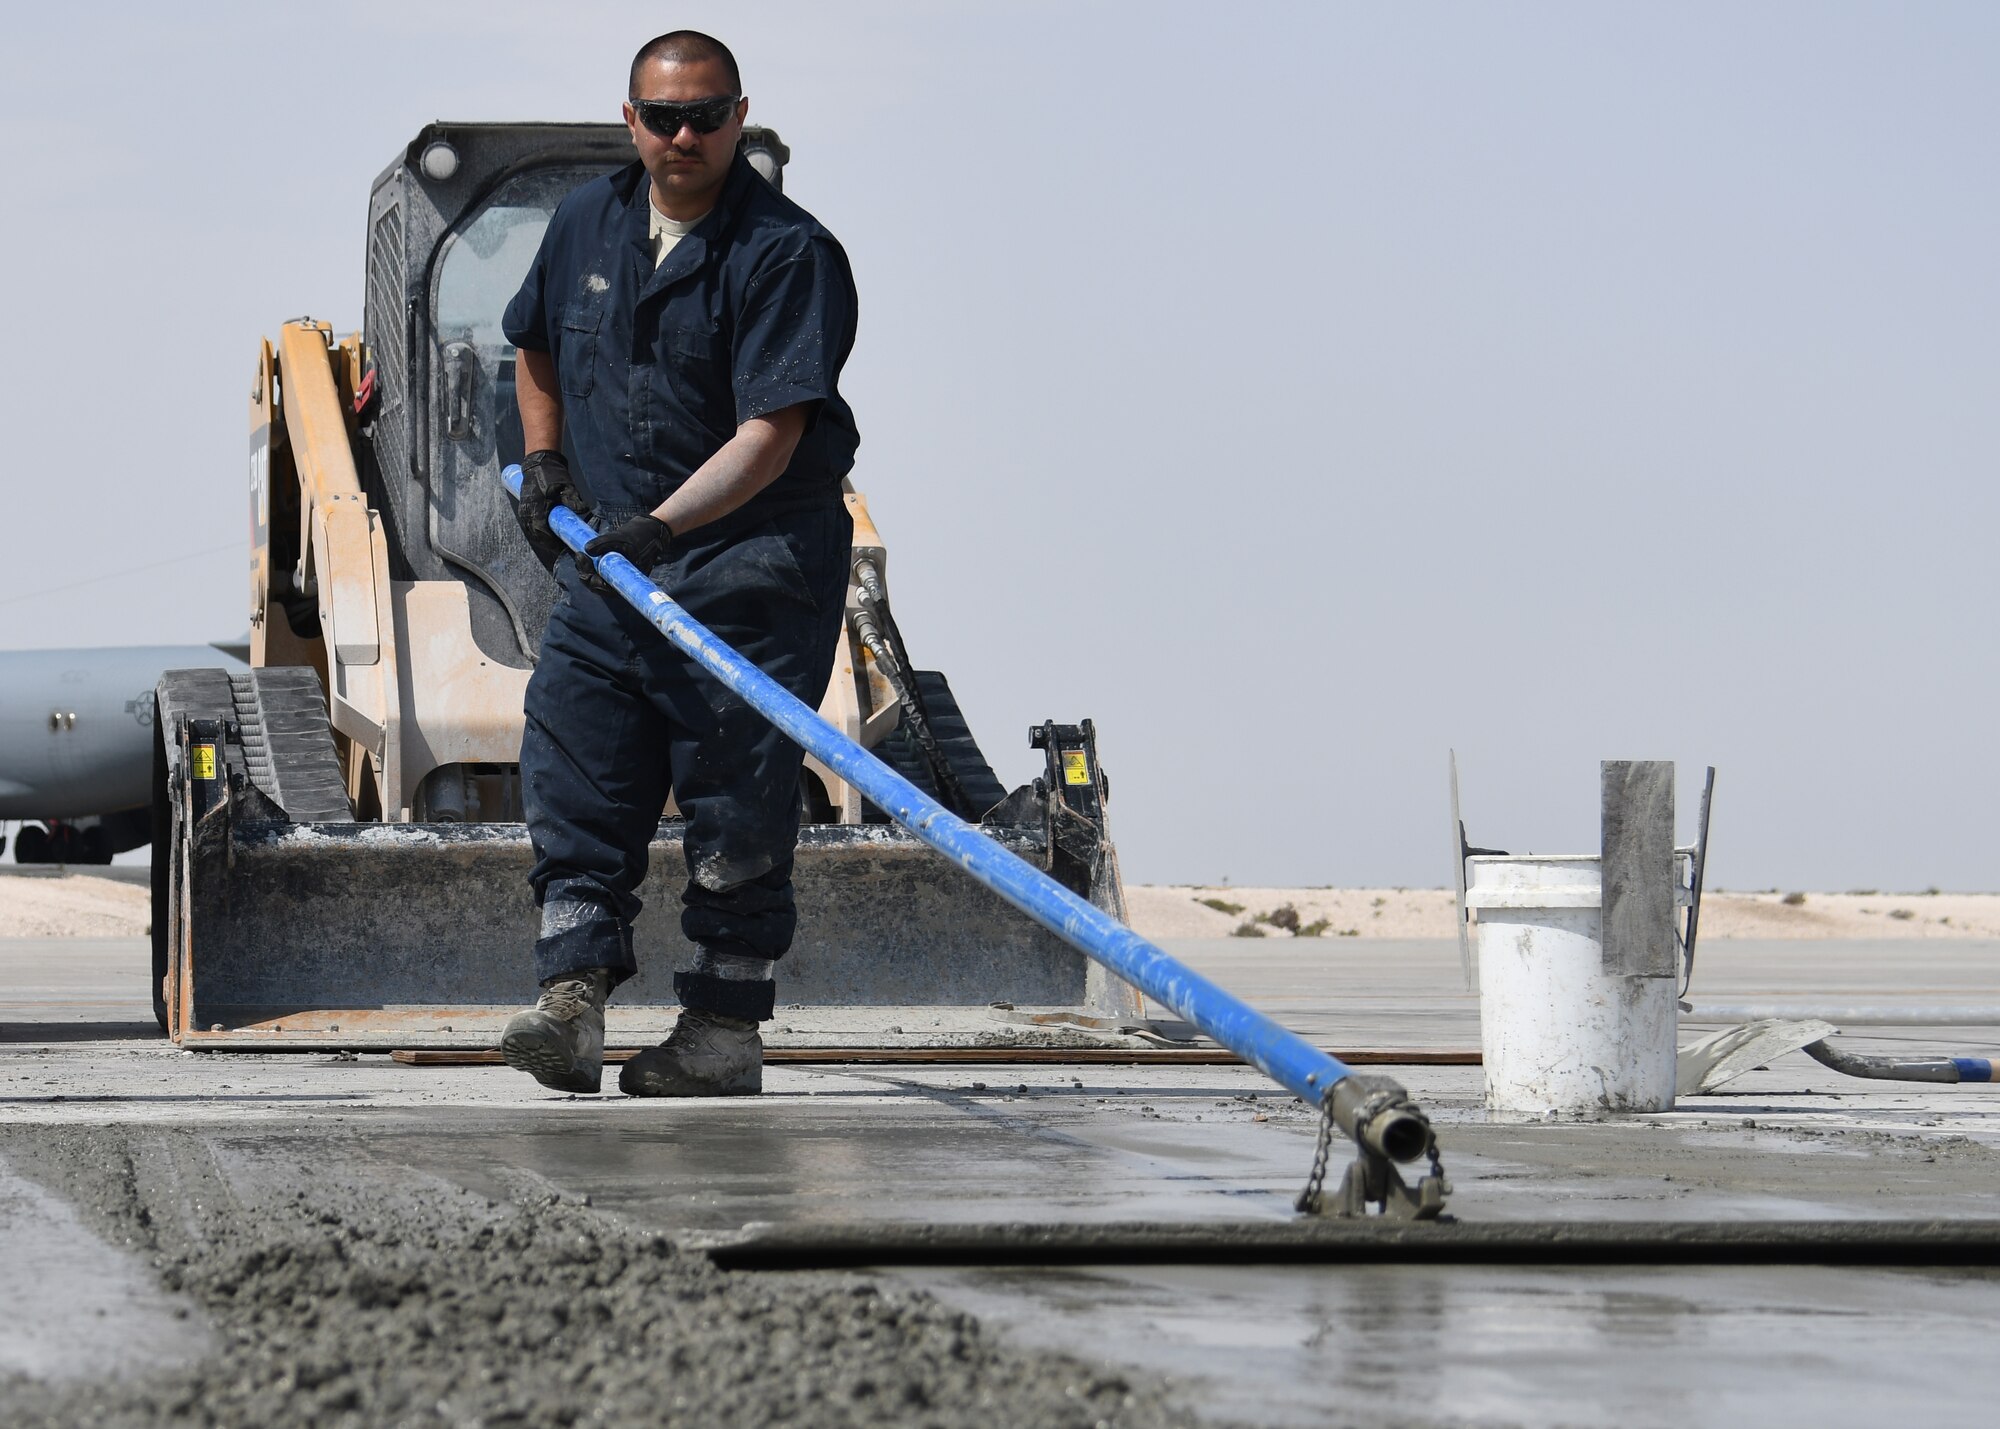 U.S. Air Force Staff Sgt. Michael Hidalgo, a heavy equipment and constructions journeyman with the 379th Expeditionary Civil Engineer Squadron Pavements and Equipment Flight, smooths out wet concrete at Al Udeid Air Base, Qatar, Feb. 21, 2017. Using a bull float tool, Costa brought the concrete “sludge” to the top, allowing for the concrete to have a smooth finish. (U.S. Air Force photo by Senior Airman Miles Wilson)